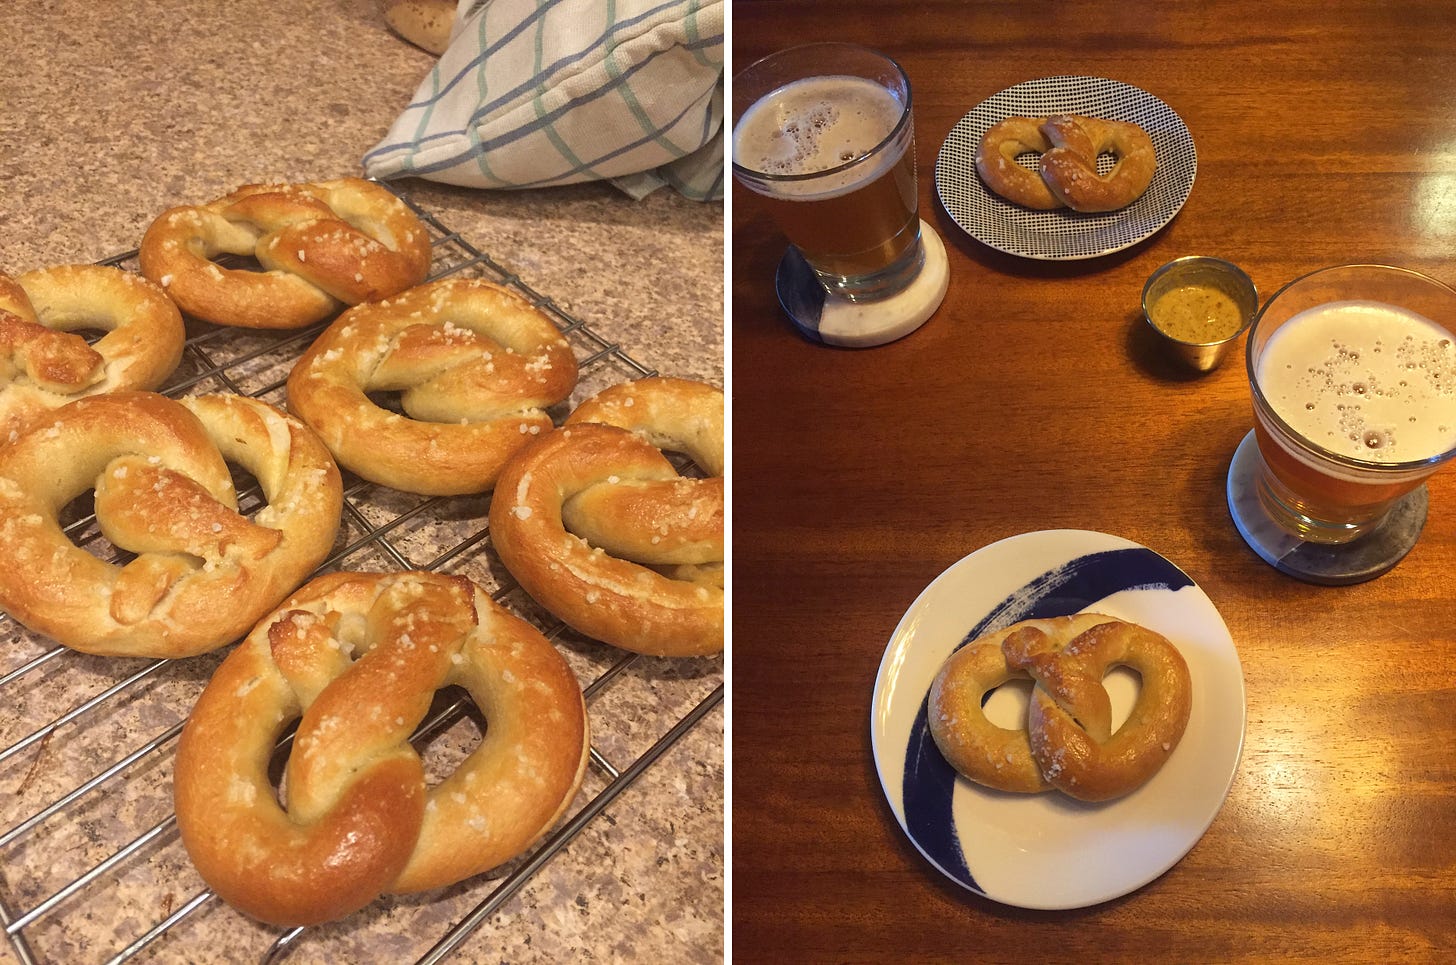 left image: six golden brown, salted soft pretzels sit on a cooling rack. right image: two small plates each with a pretzel on it sit with a glass of beer beside it on a coaster. A ramekin of mustard is on the table in between.